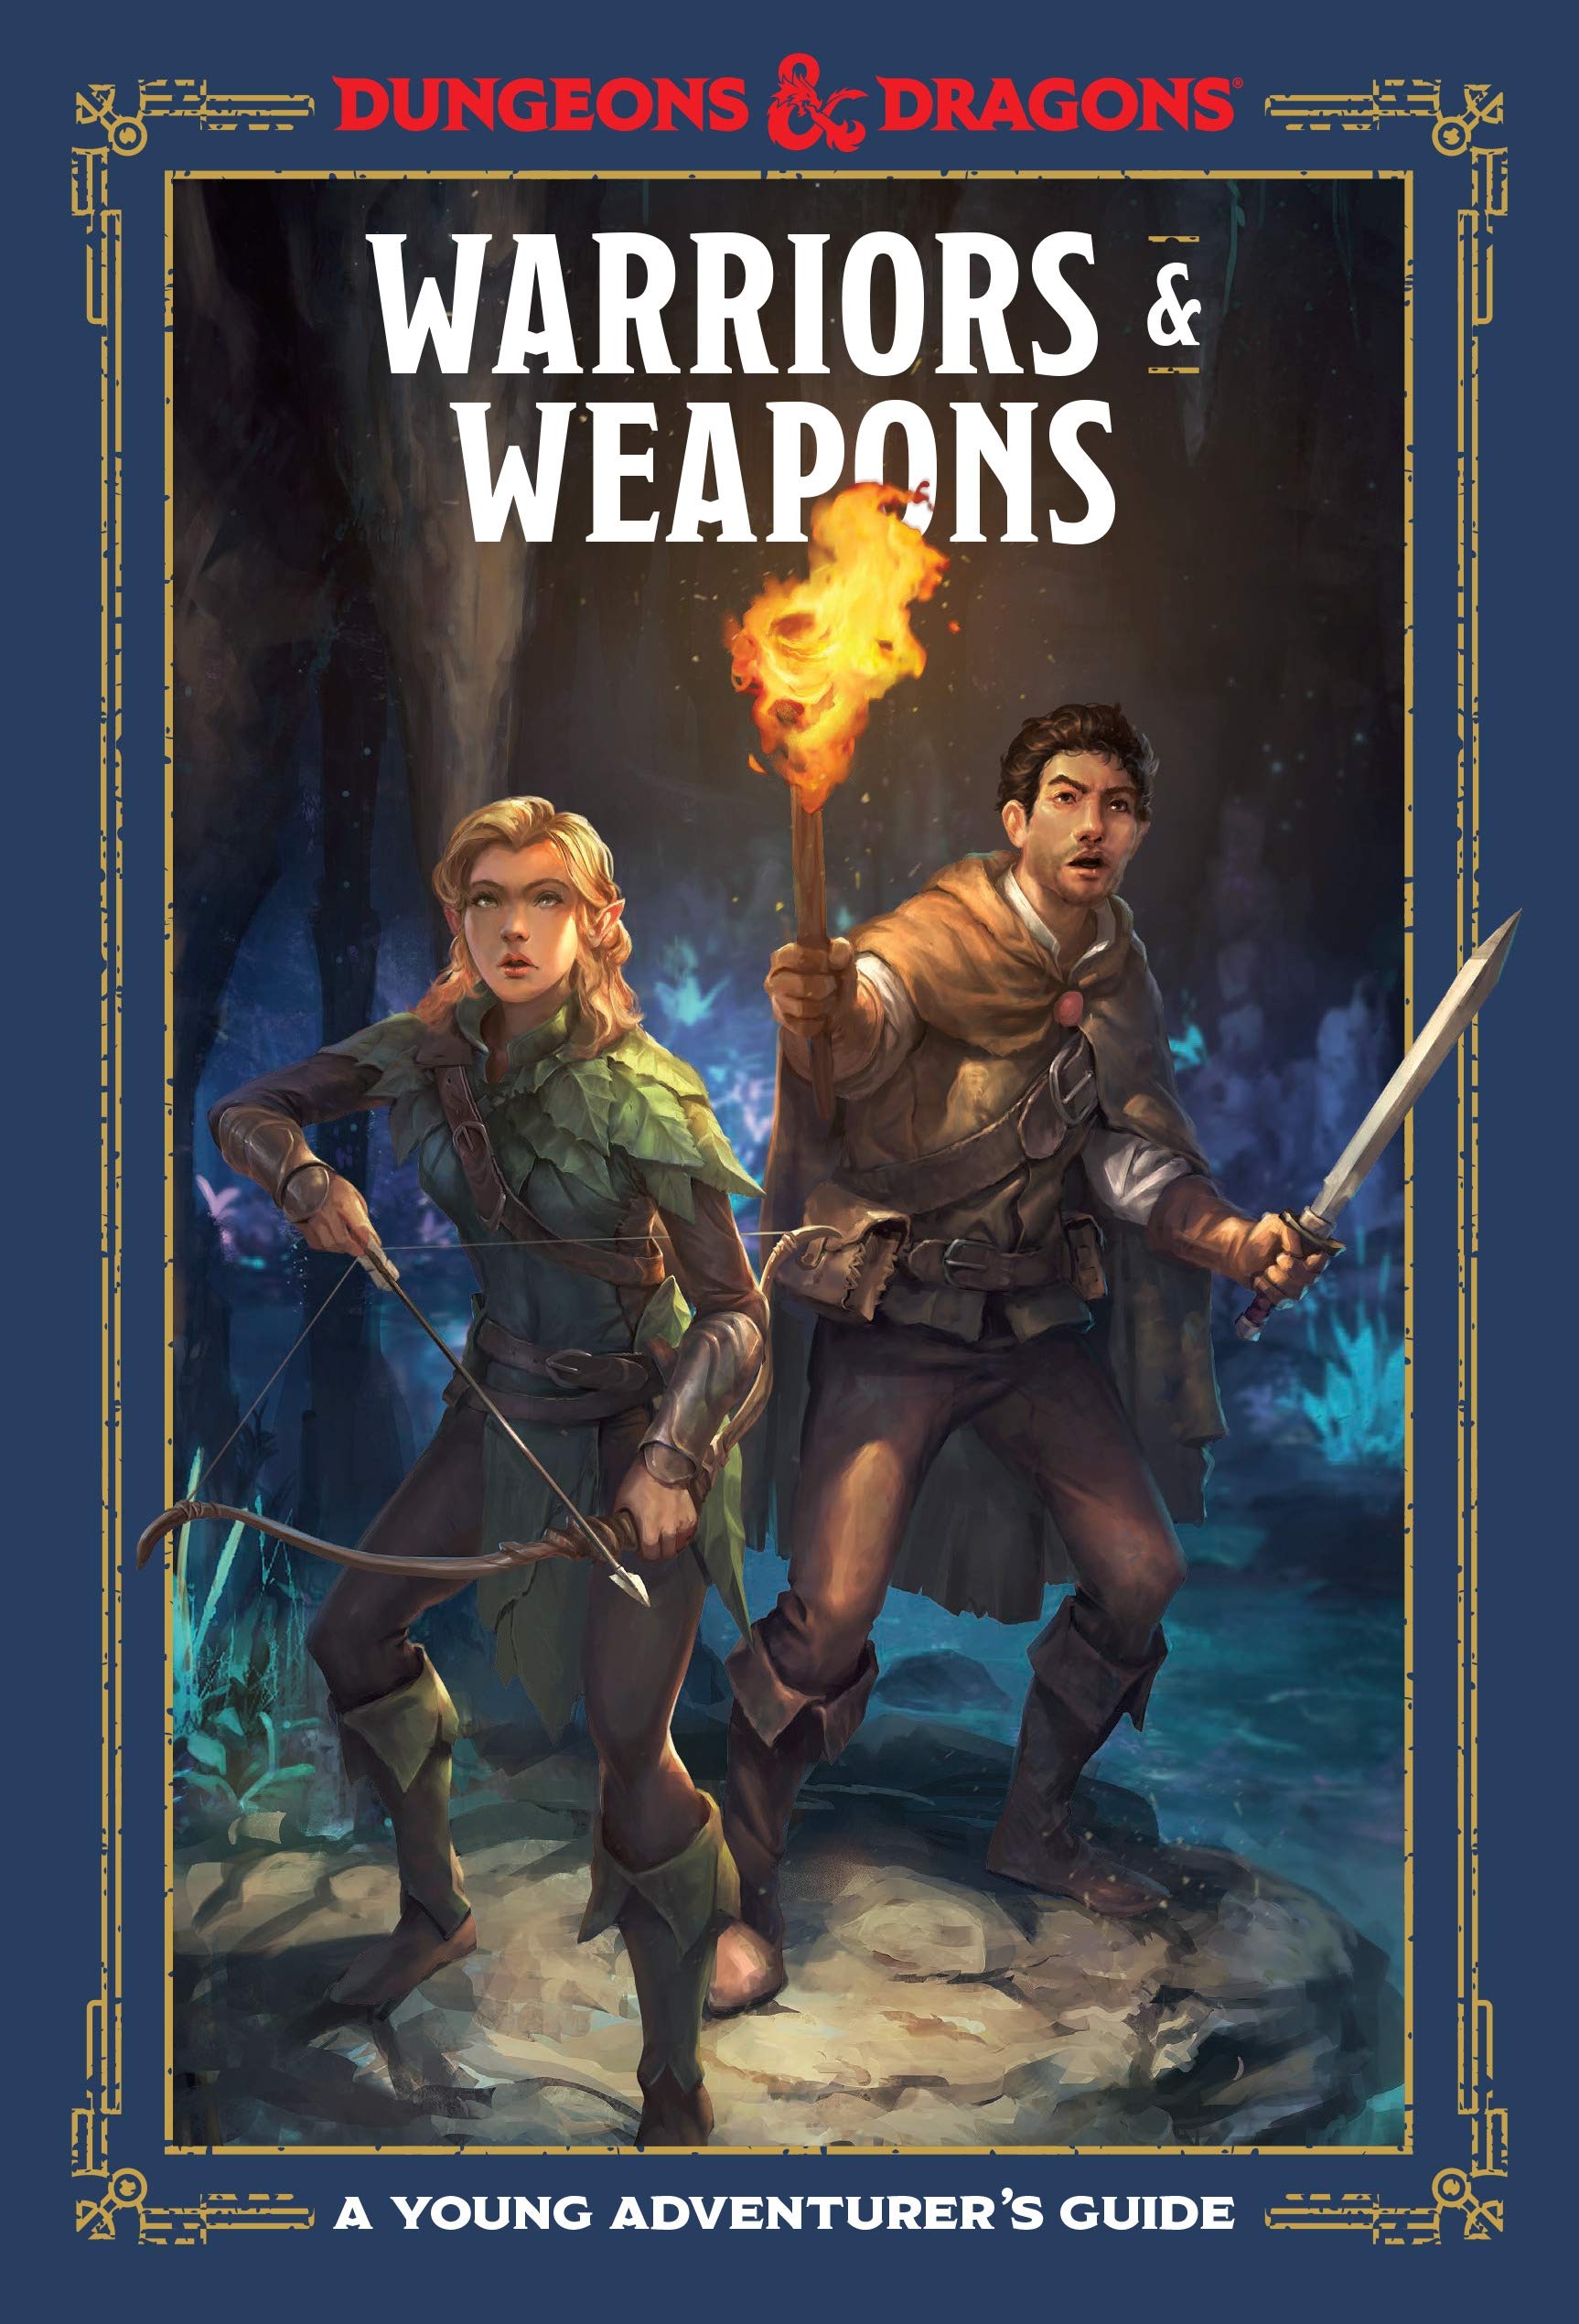 Dungeons & Dragons: Warriors & Weapons